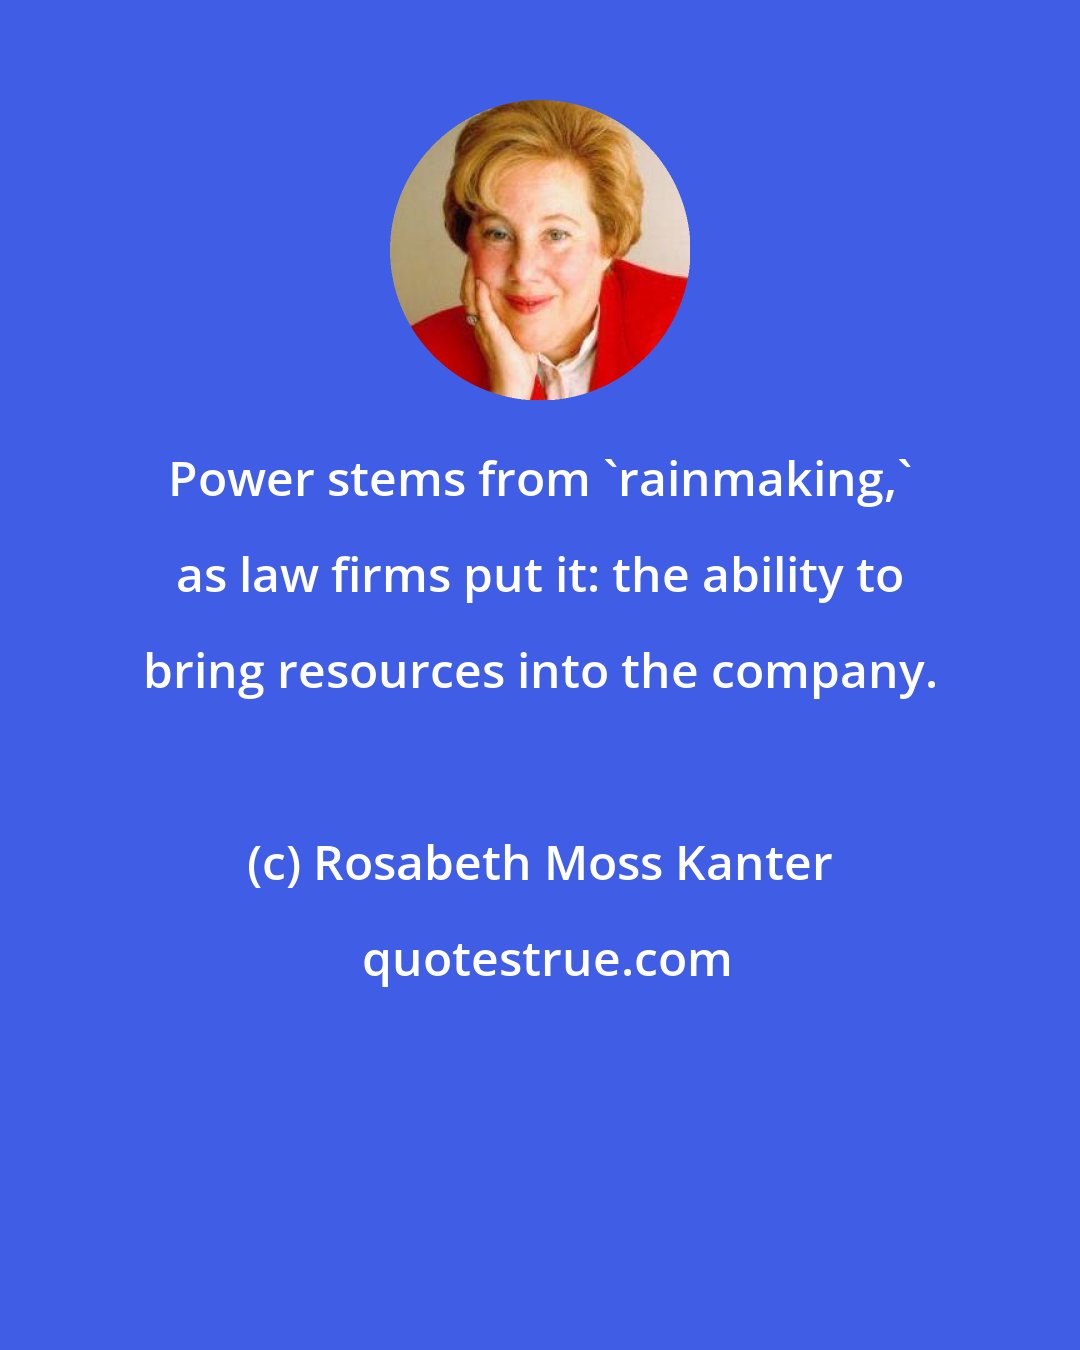 Rosabeth Moss Kanter: Power stems from 'rainmaking,' as law firms put it: the ability to bring resources into the company.